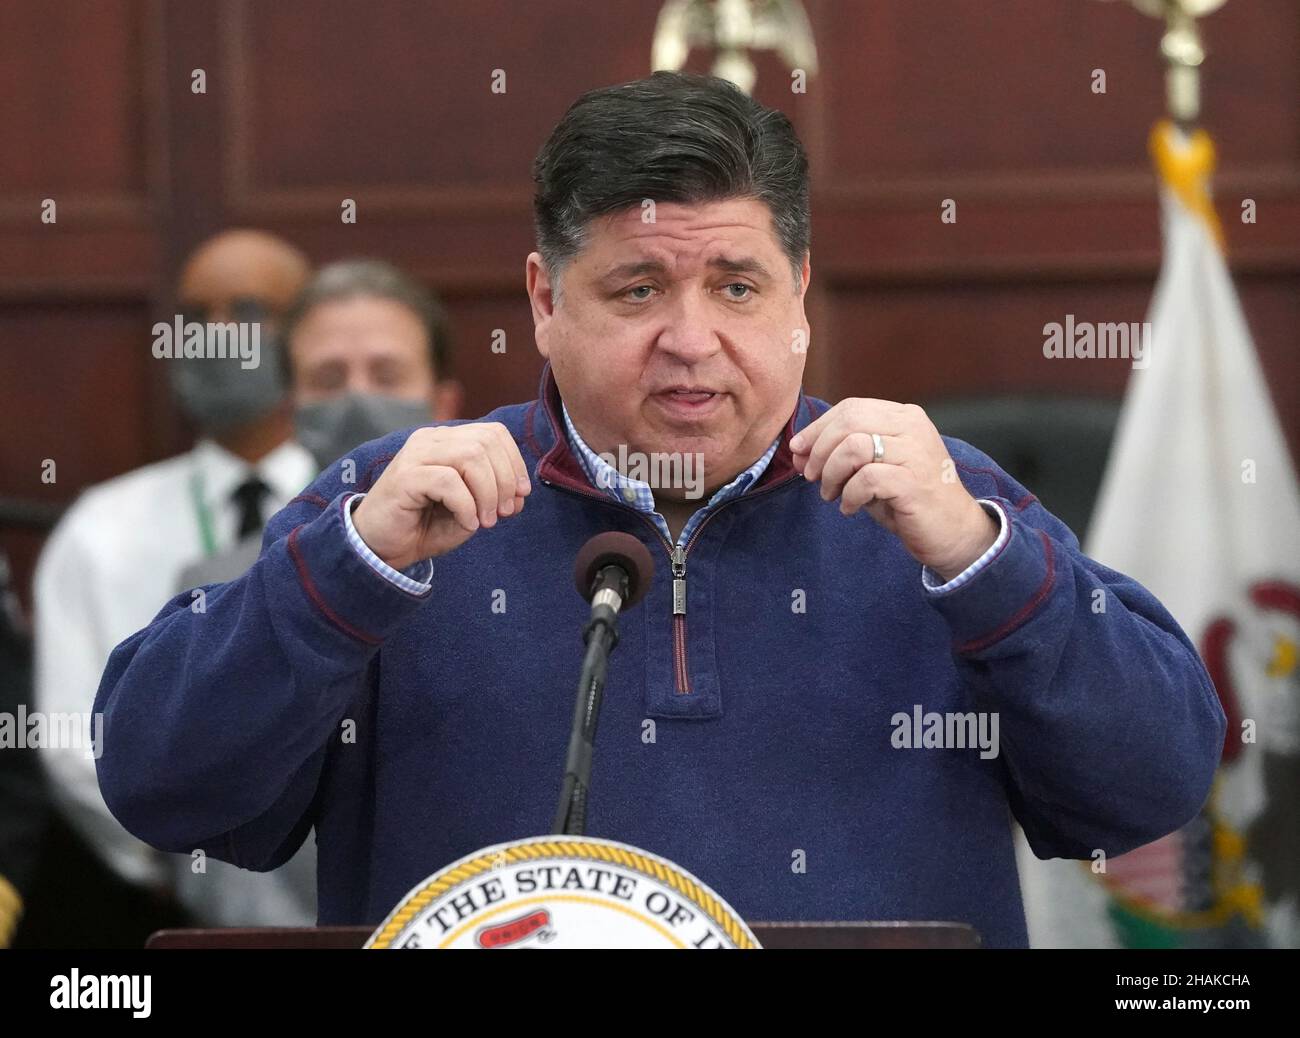 Pontoon Beach, United States. 13th Dec, 2021. Illinois Governor JB Pritzker makes his remarks at a press conference after touring the Amazon Hub deadly tornado damage site in Pontoon Beach, Illinois on Monday, December 13, 2021. Six people were killed after a powerful tornado ripped apart a large Amazon storage facility on Friday, December 10, 2021. Photo by Bill Greenblatt/UPI Credit: UPI/Alamy Live News Stock Photo